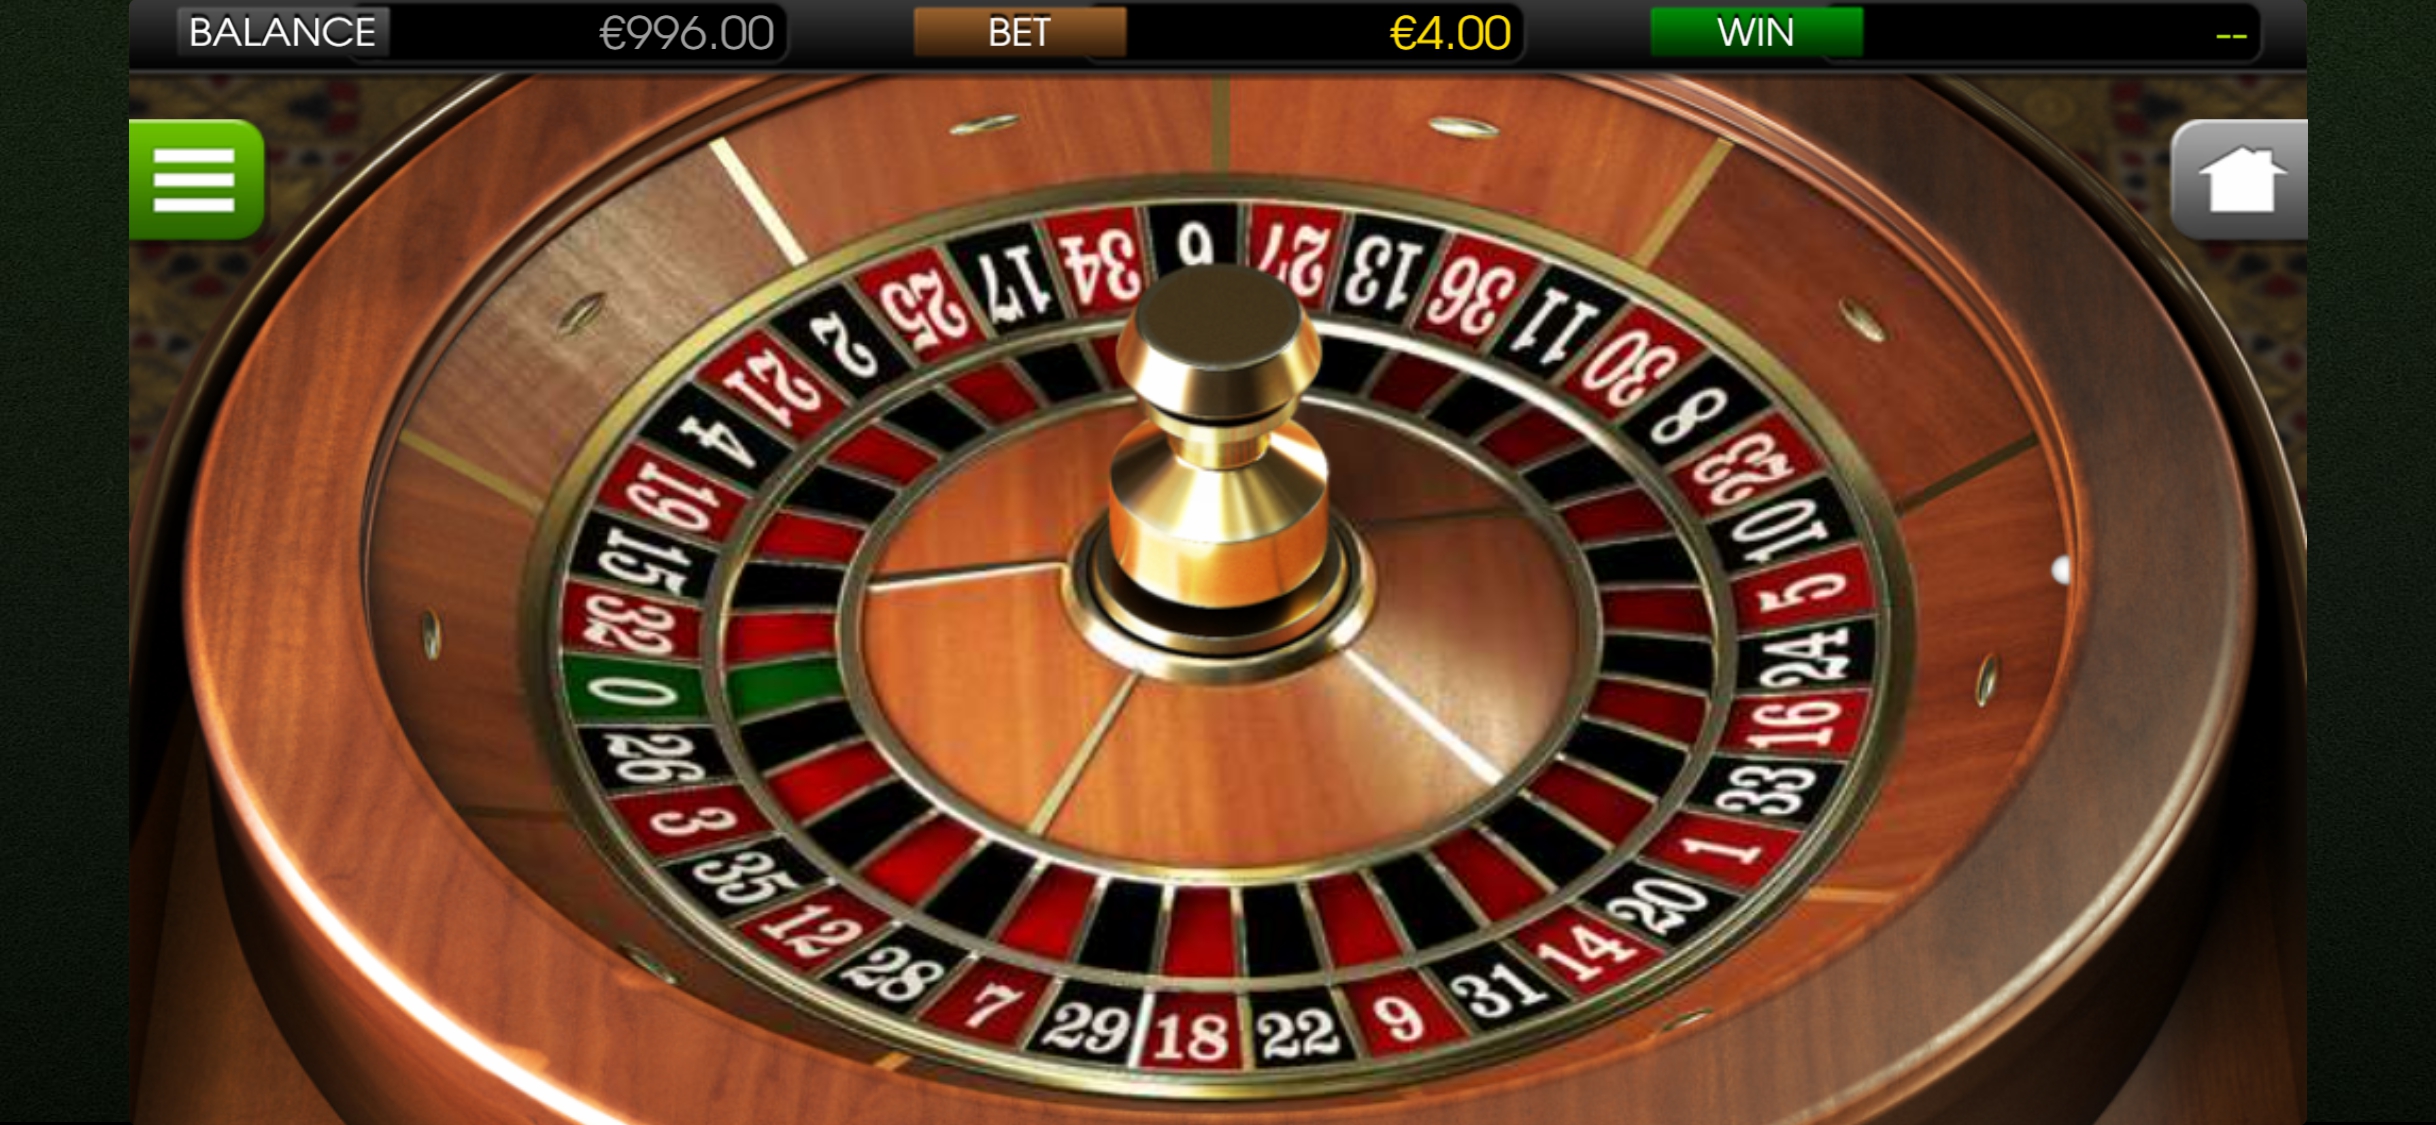 Red Star Poker Casino Mobile Casino Games Review